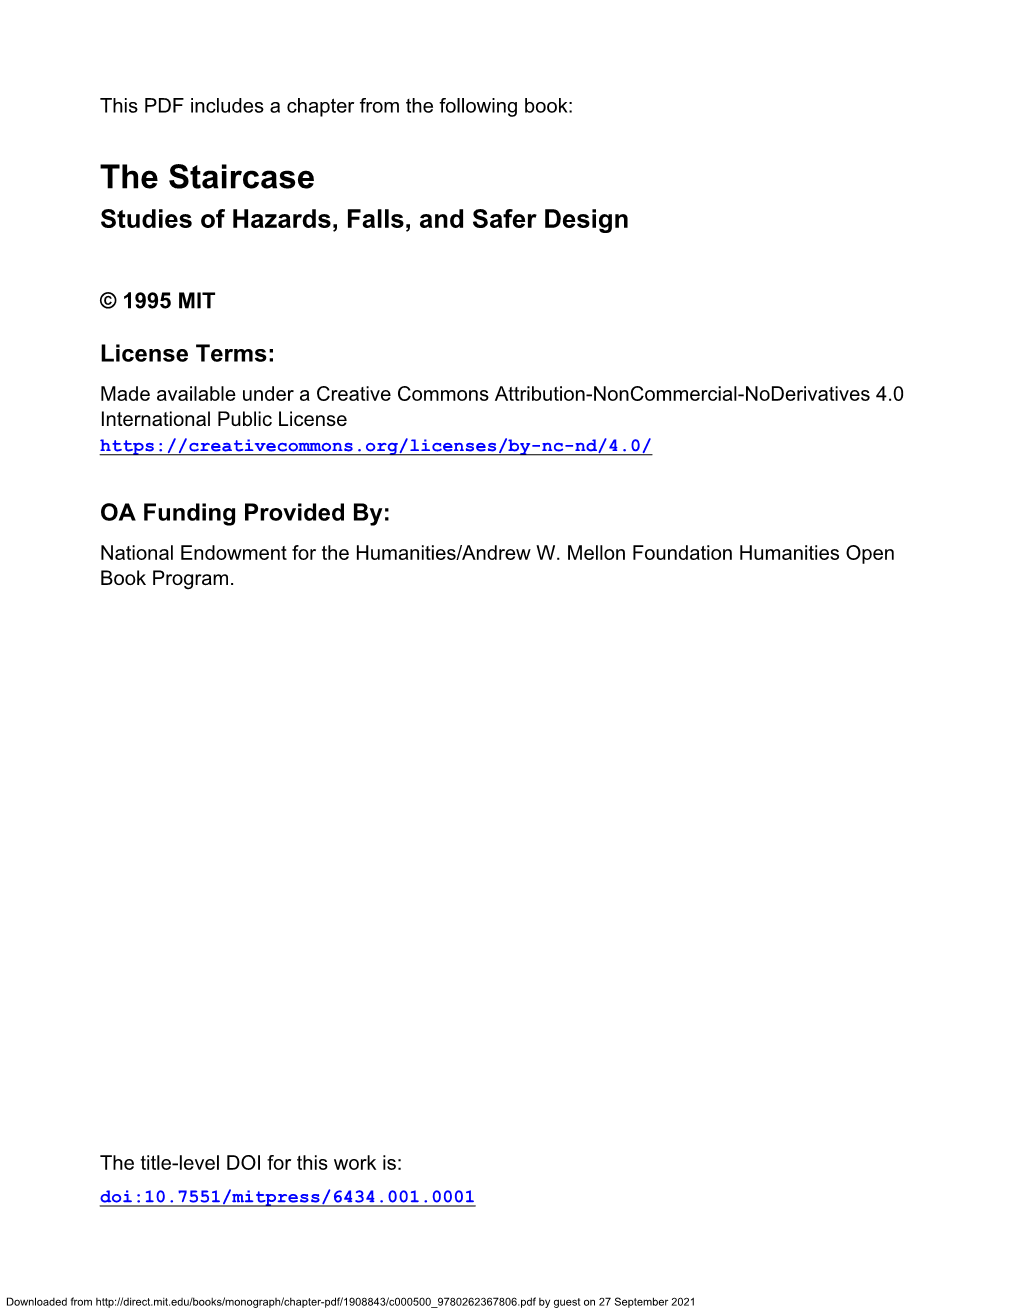 The Staircase Studies of Hazards, Falls, and Safer Design